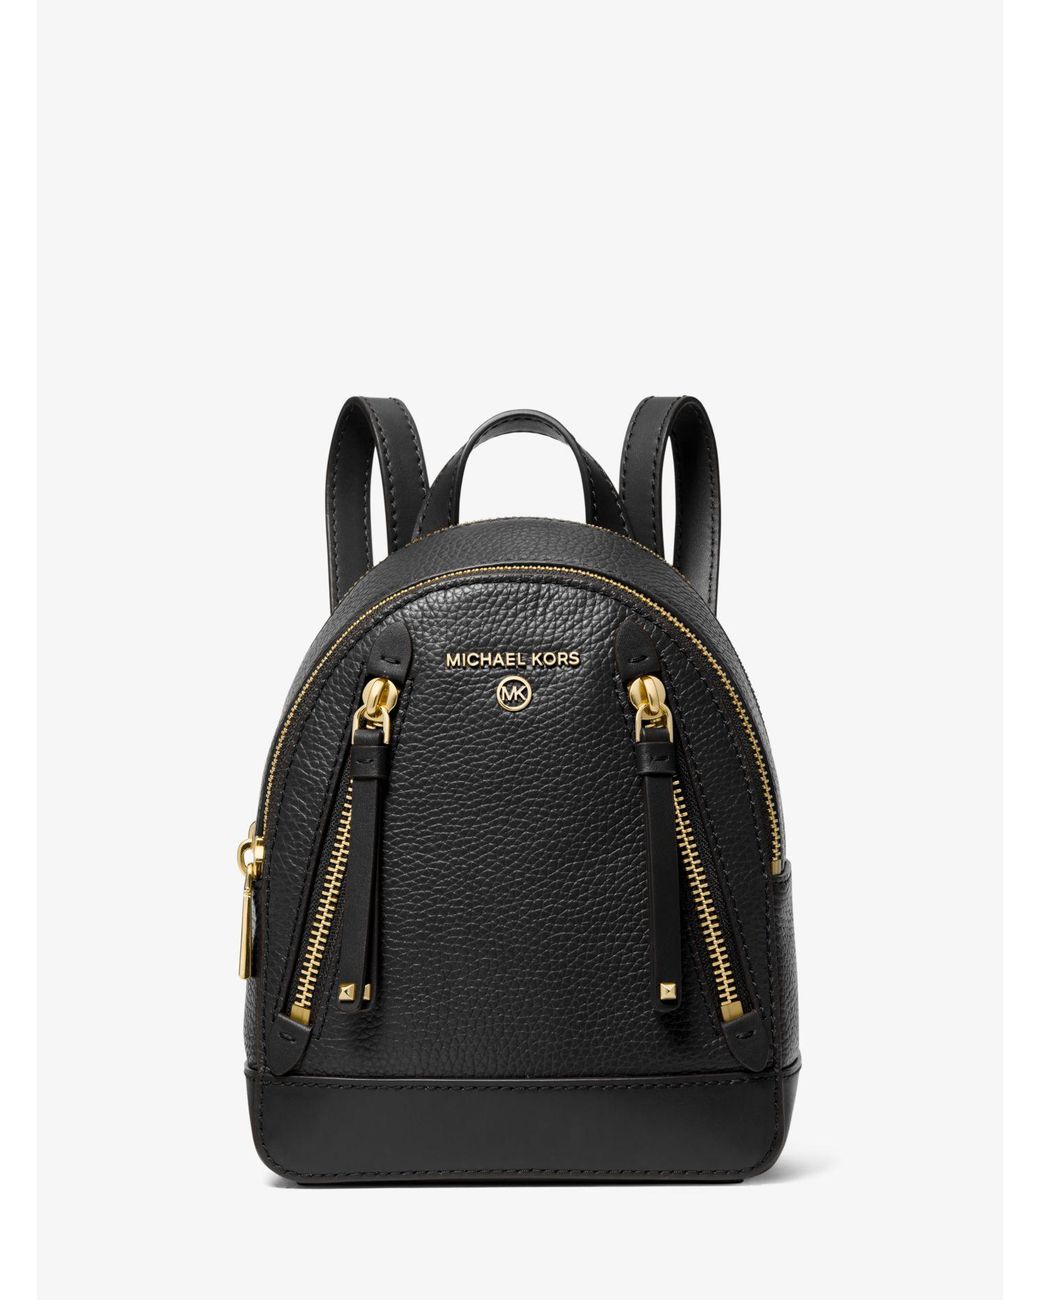 Michael Kors Brooklyn Extra-small Pebbled Leather Backpack in Black | Lyst